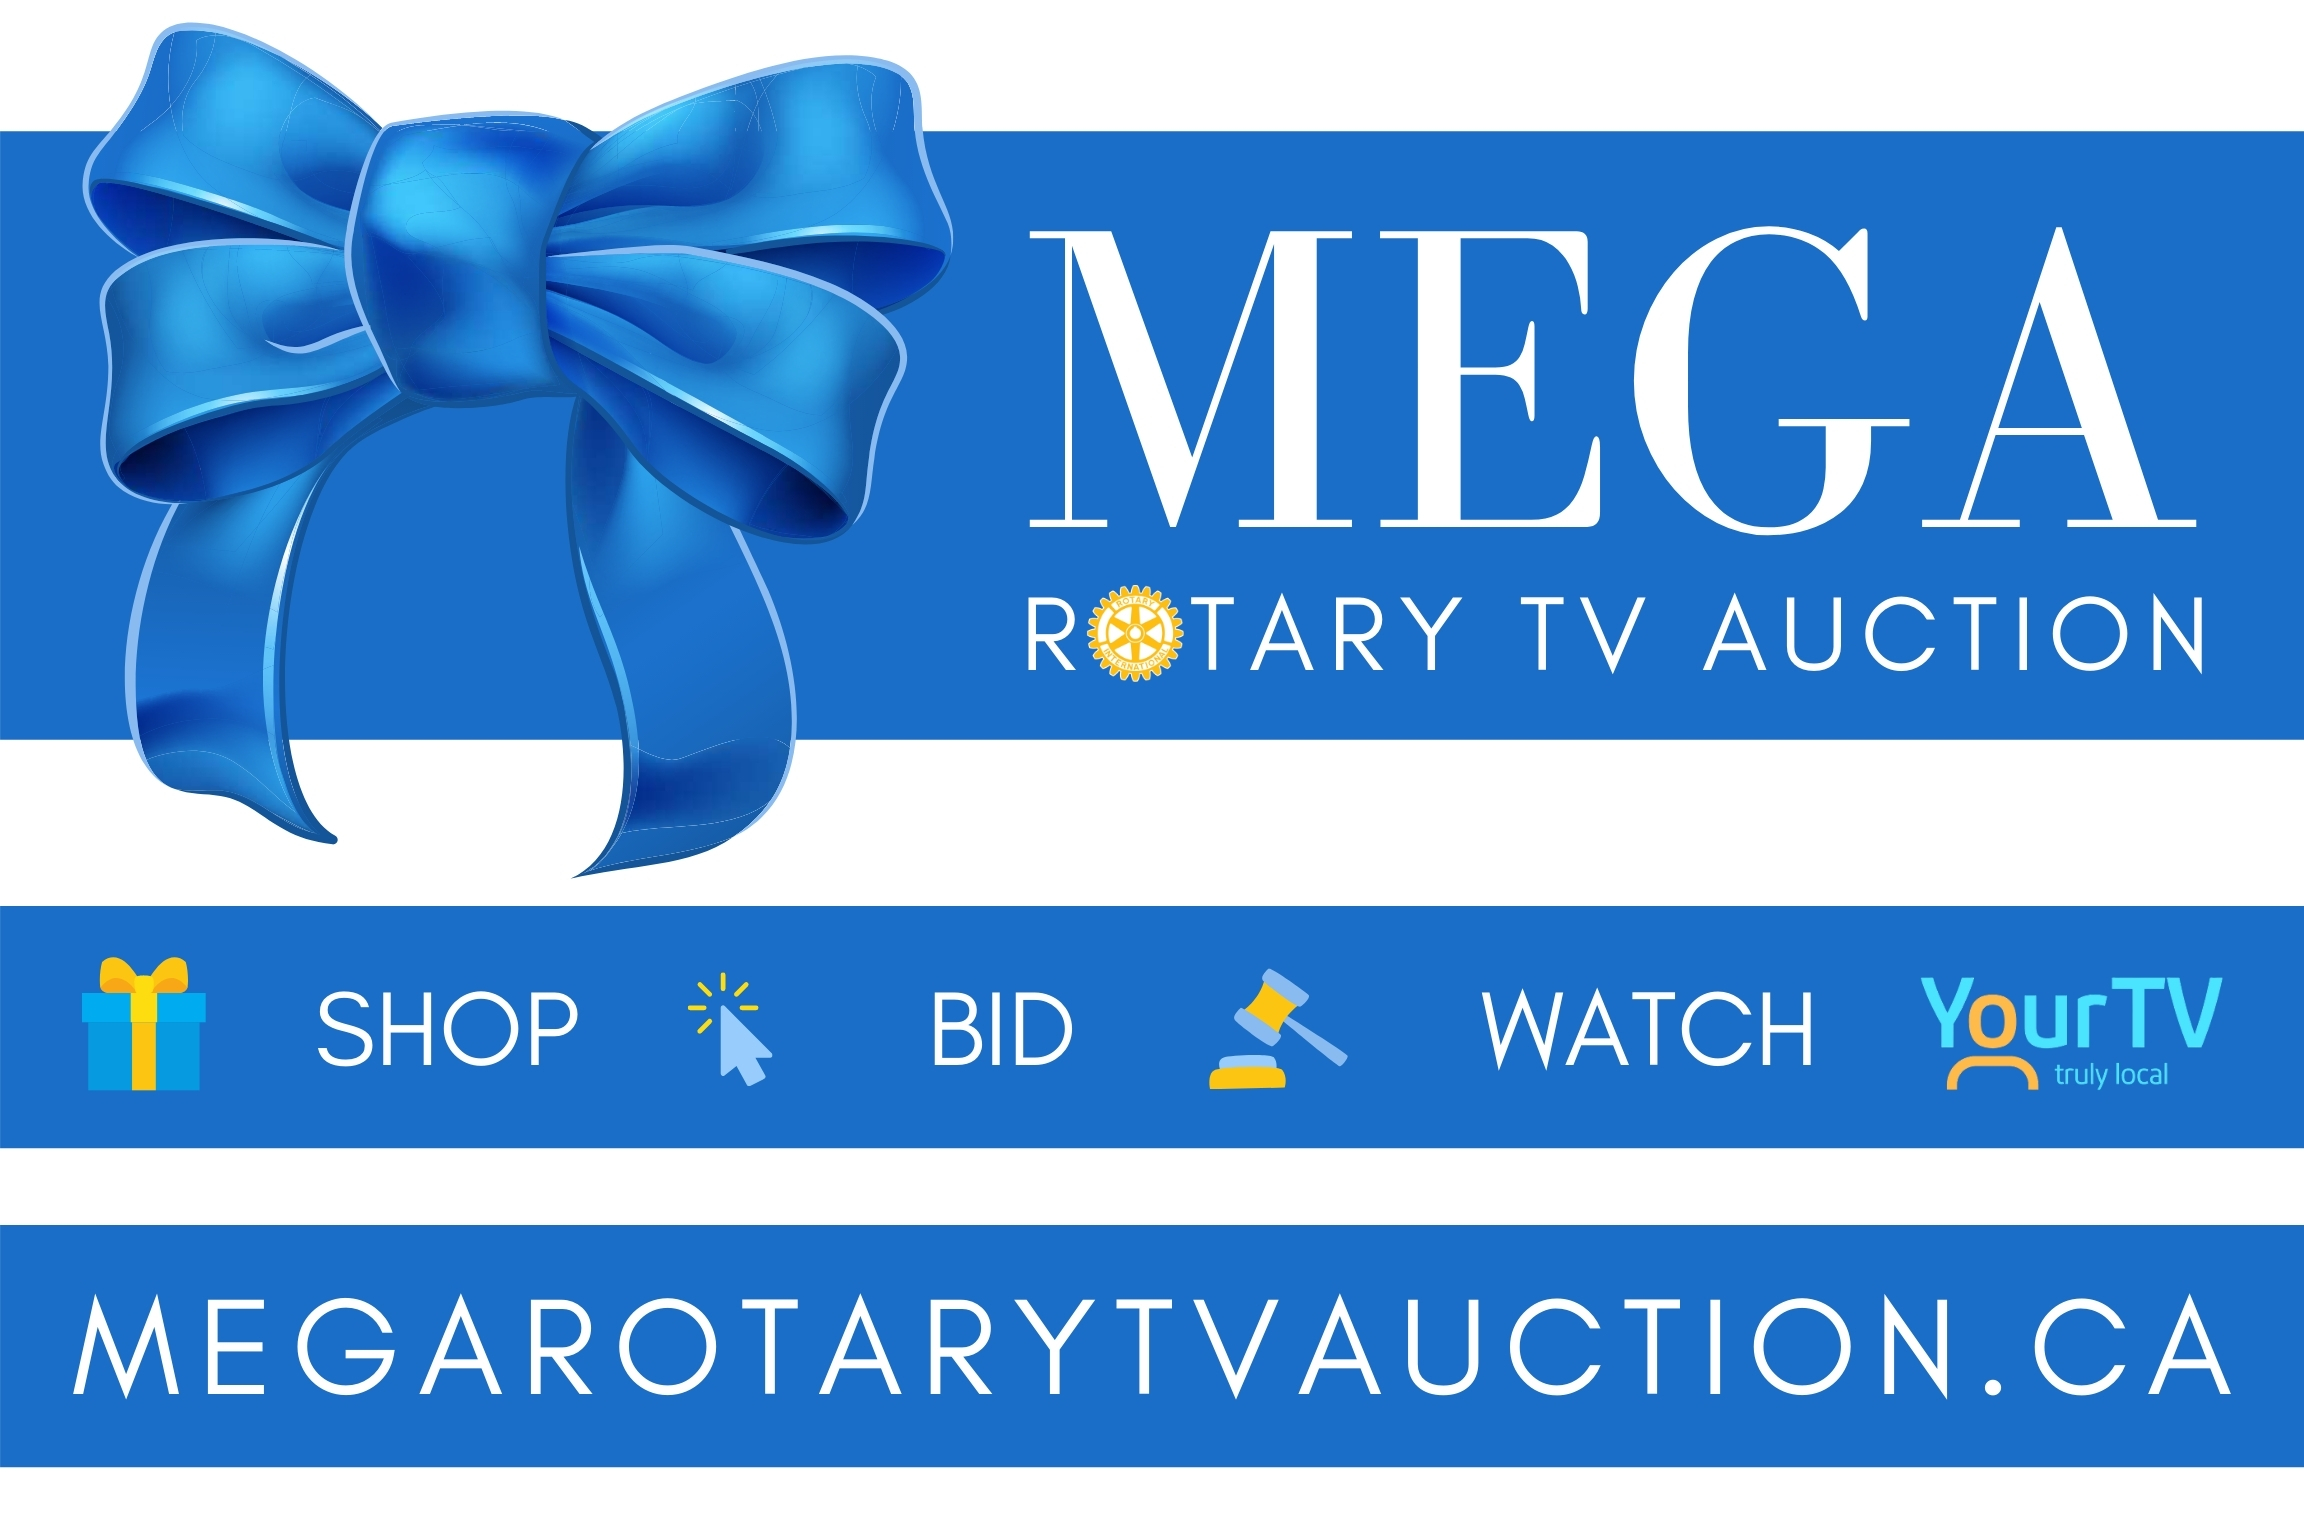 Looking for Donations! MEGA Rotary TV Auction